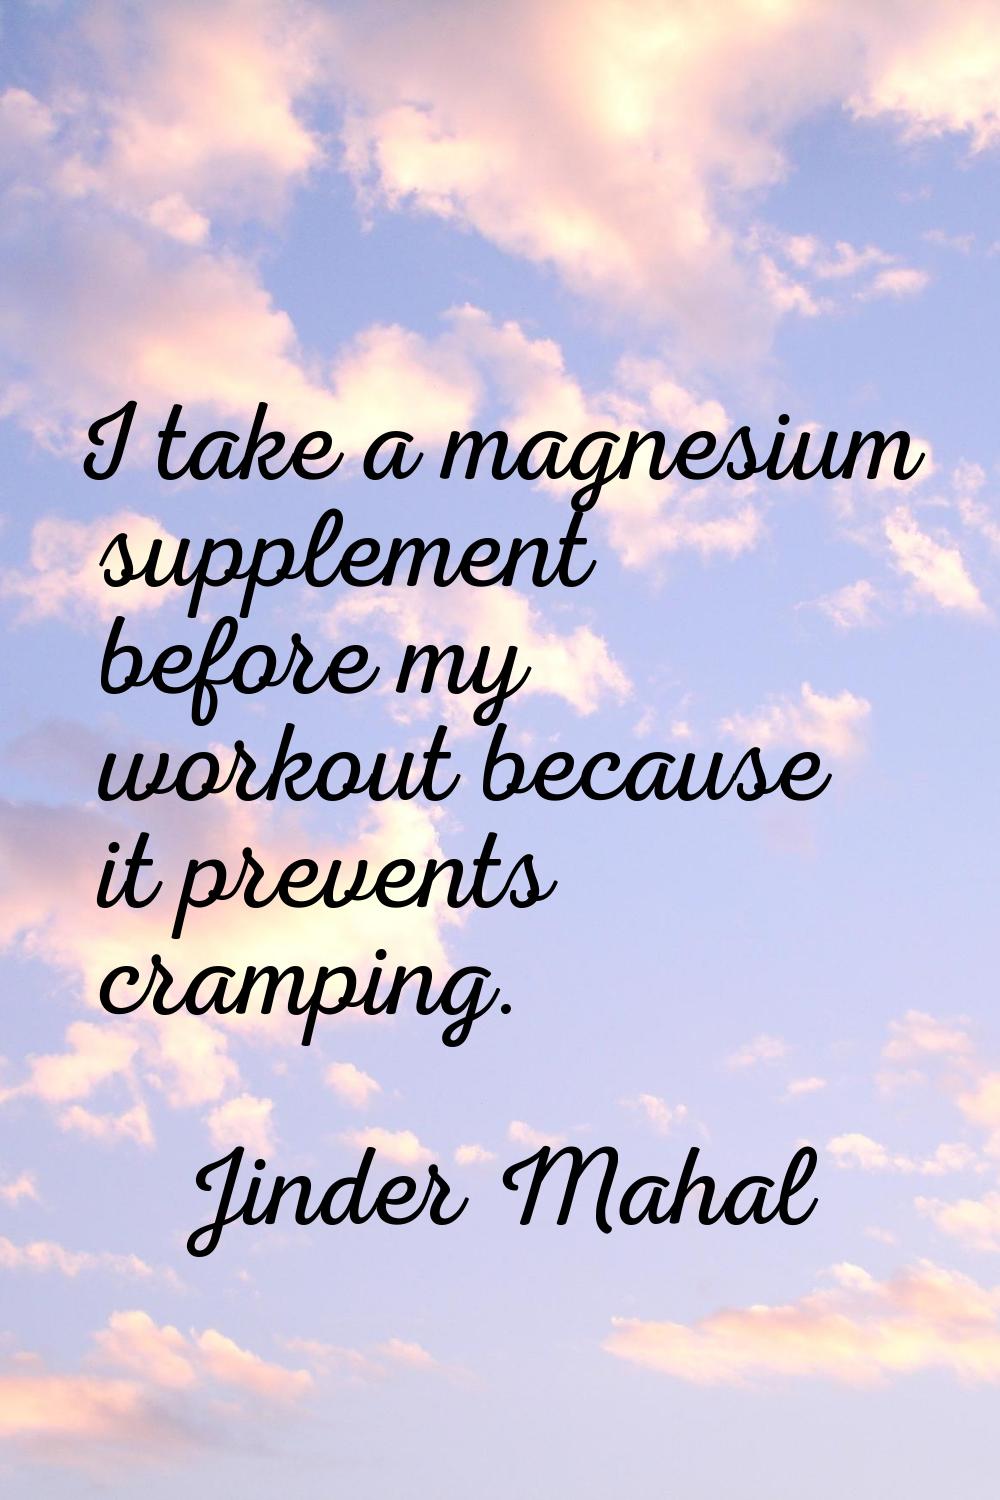 I take a magnesium supplement before my workout because it prevents cramping.